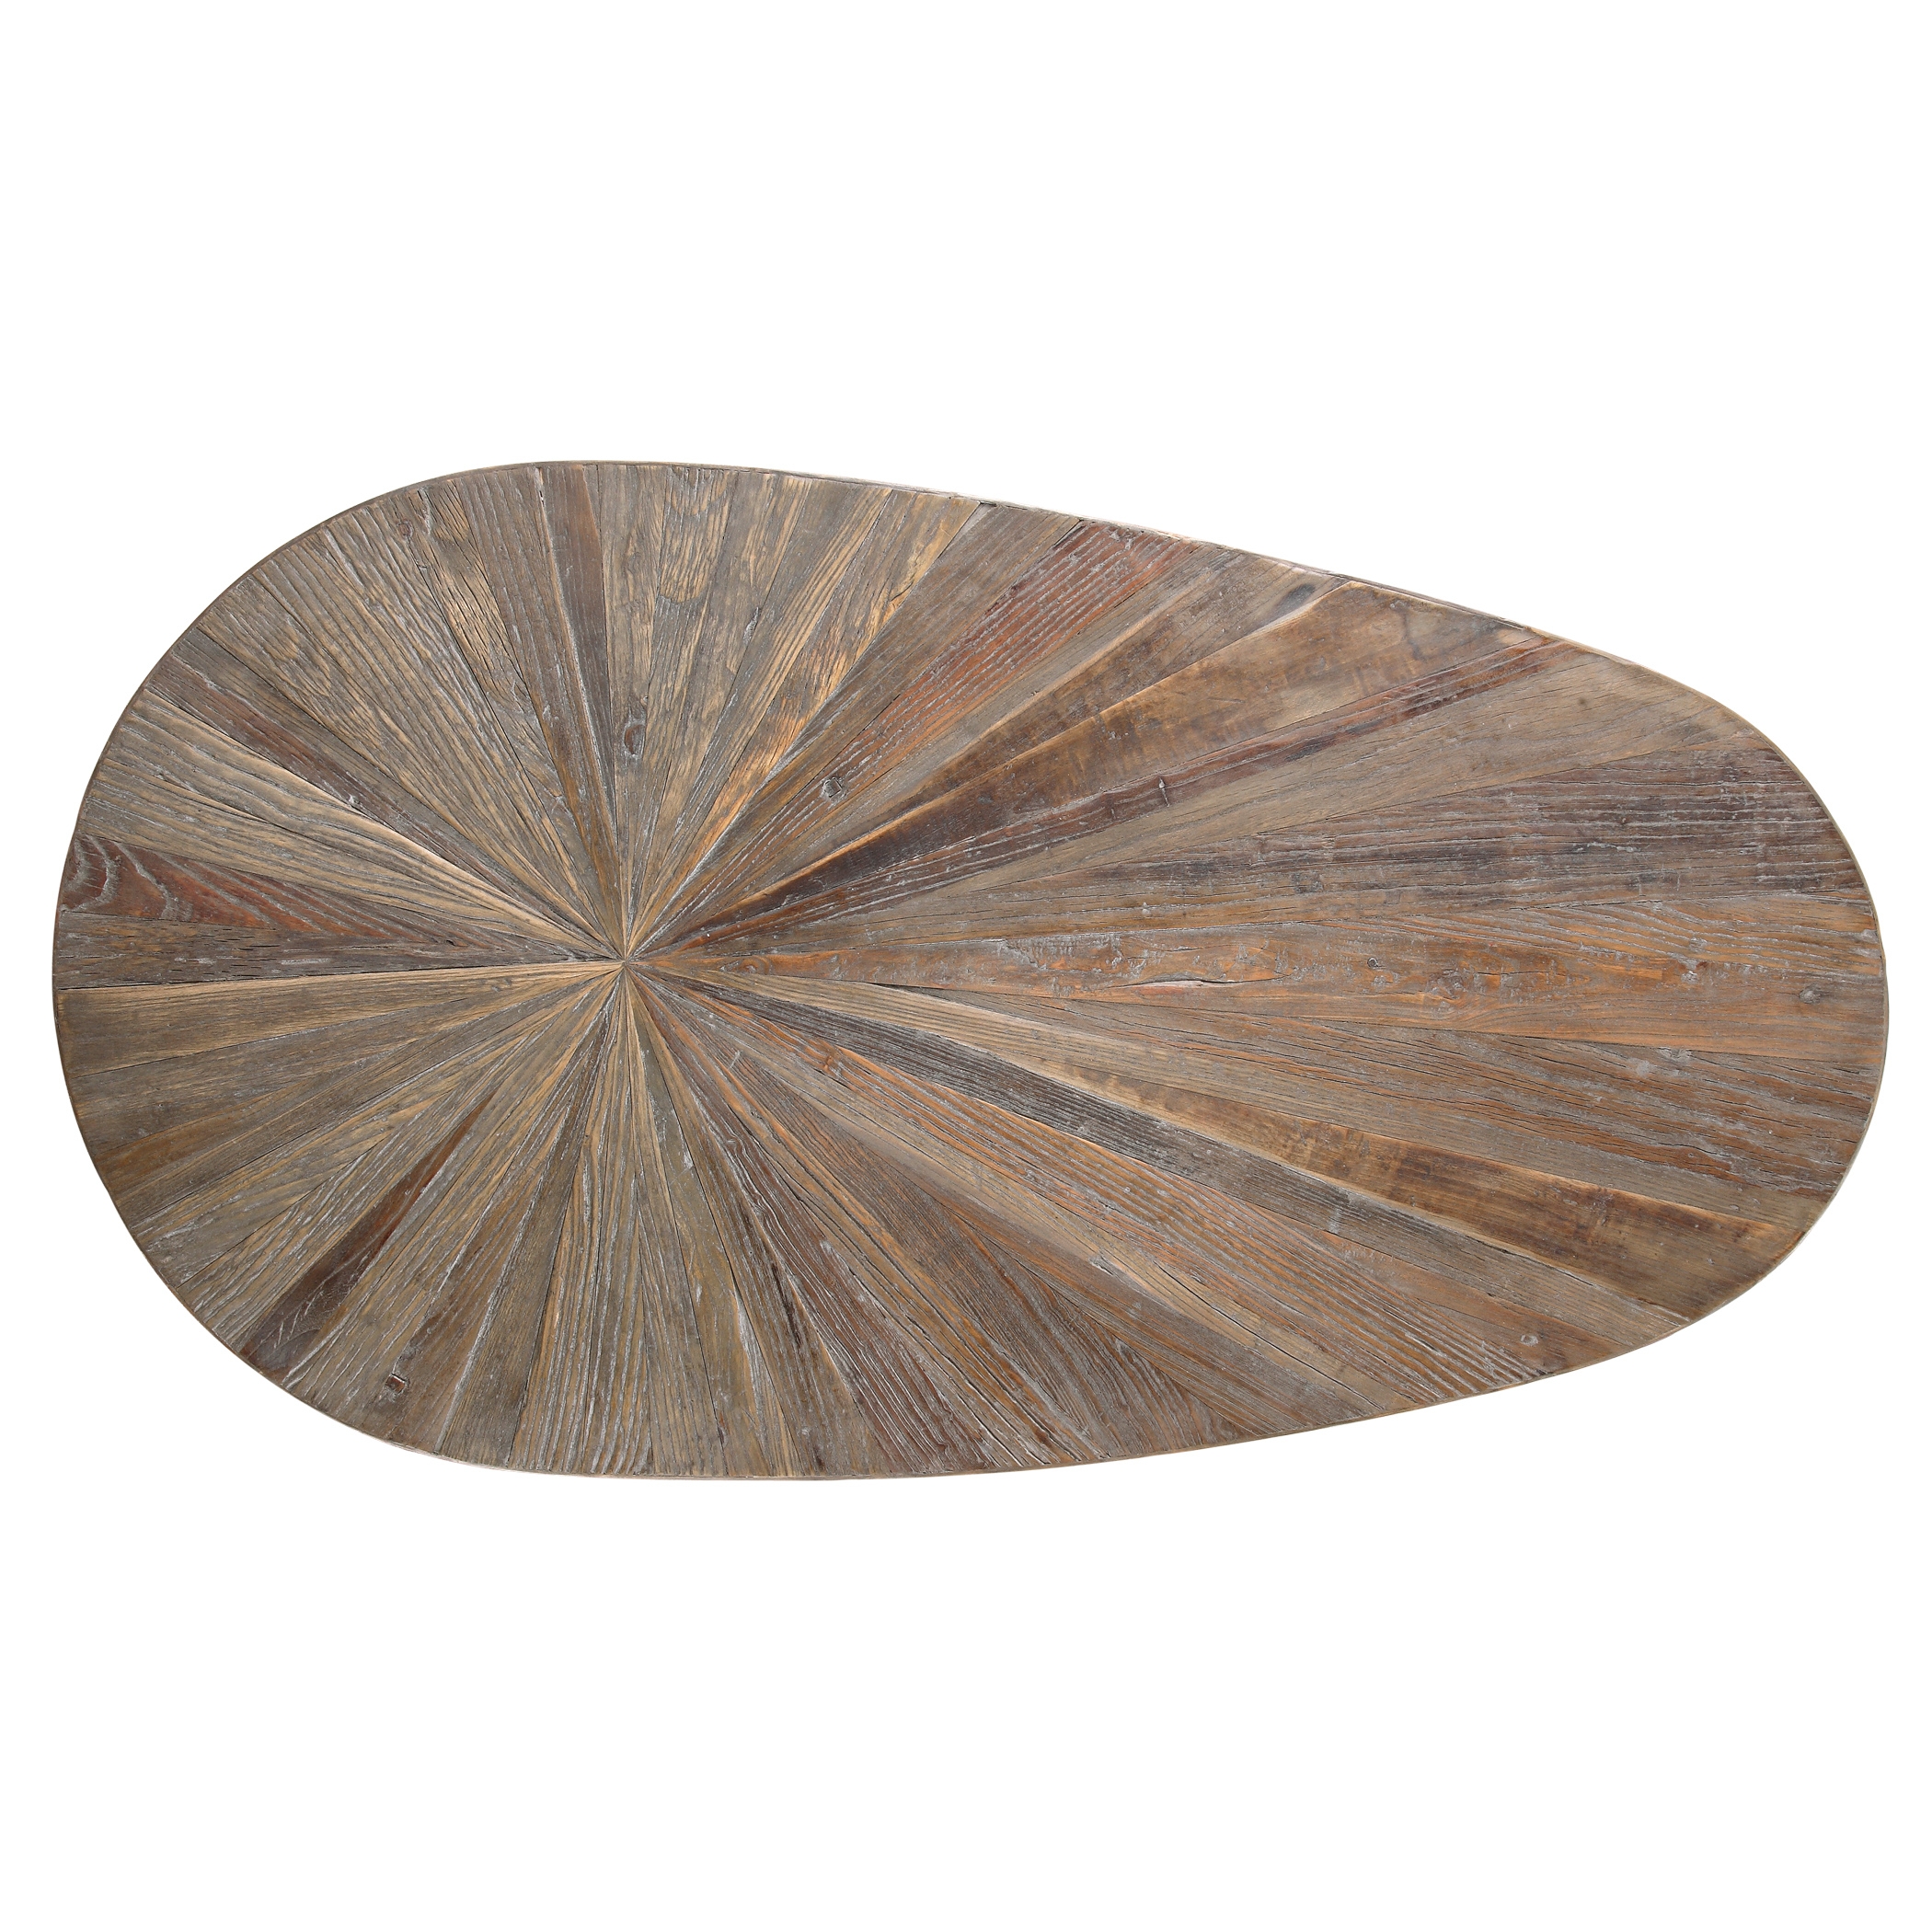 Leveni Wooden Coffee Table - Image 2